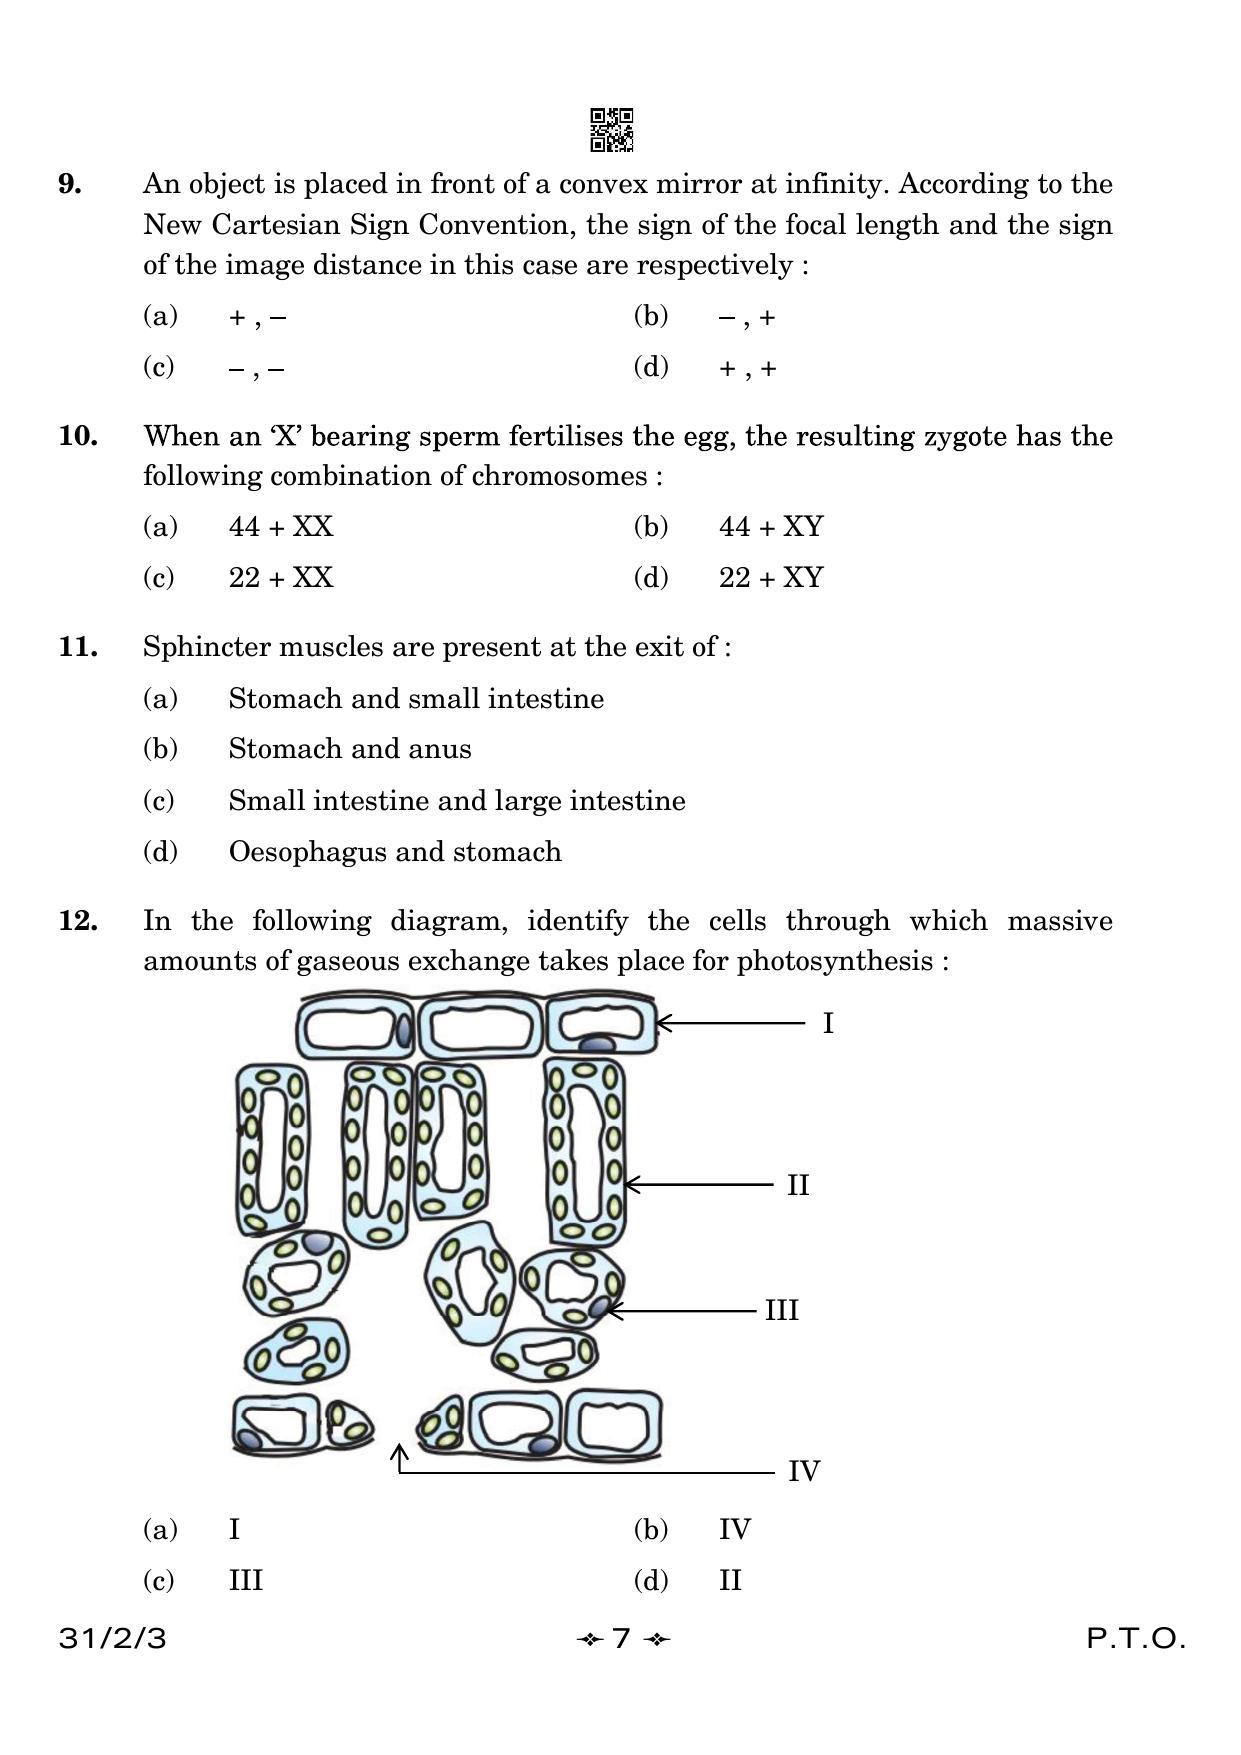 CBSE Class 10 31-2-3 Science 2023 Question Paper - Page 7